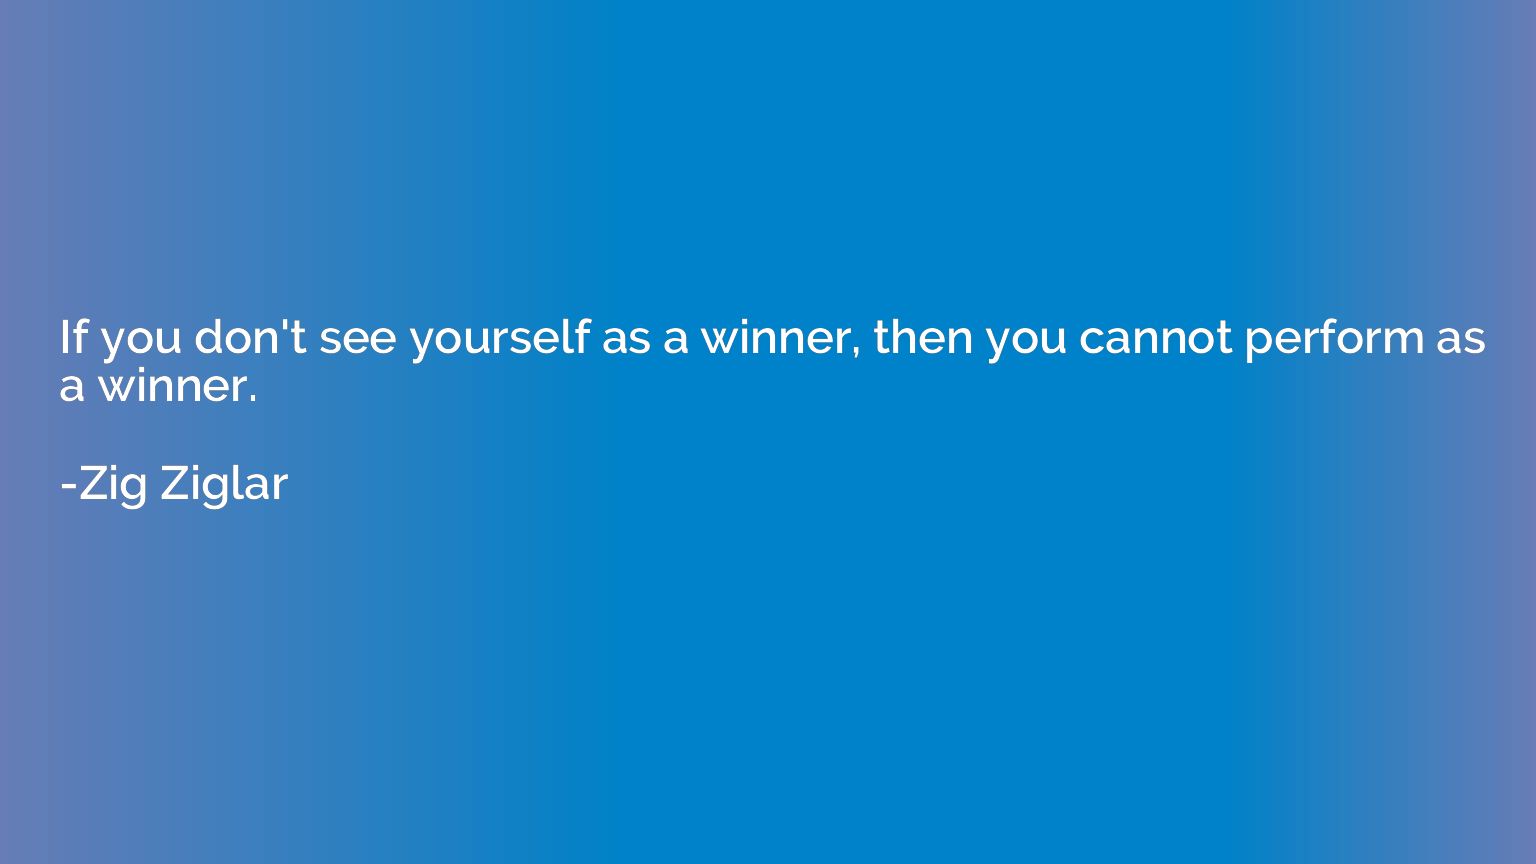 If you don't see yourself as a winner, then you cannot perfo